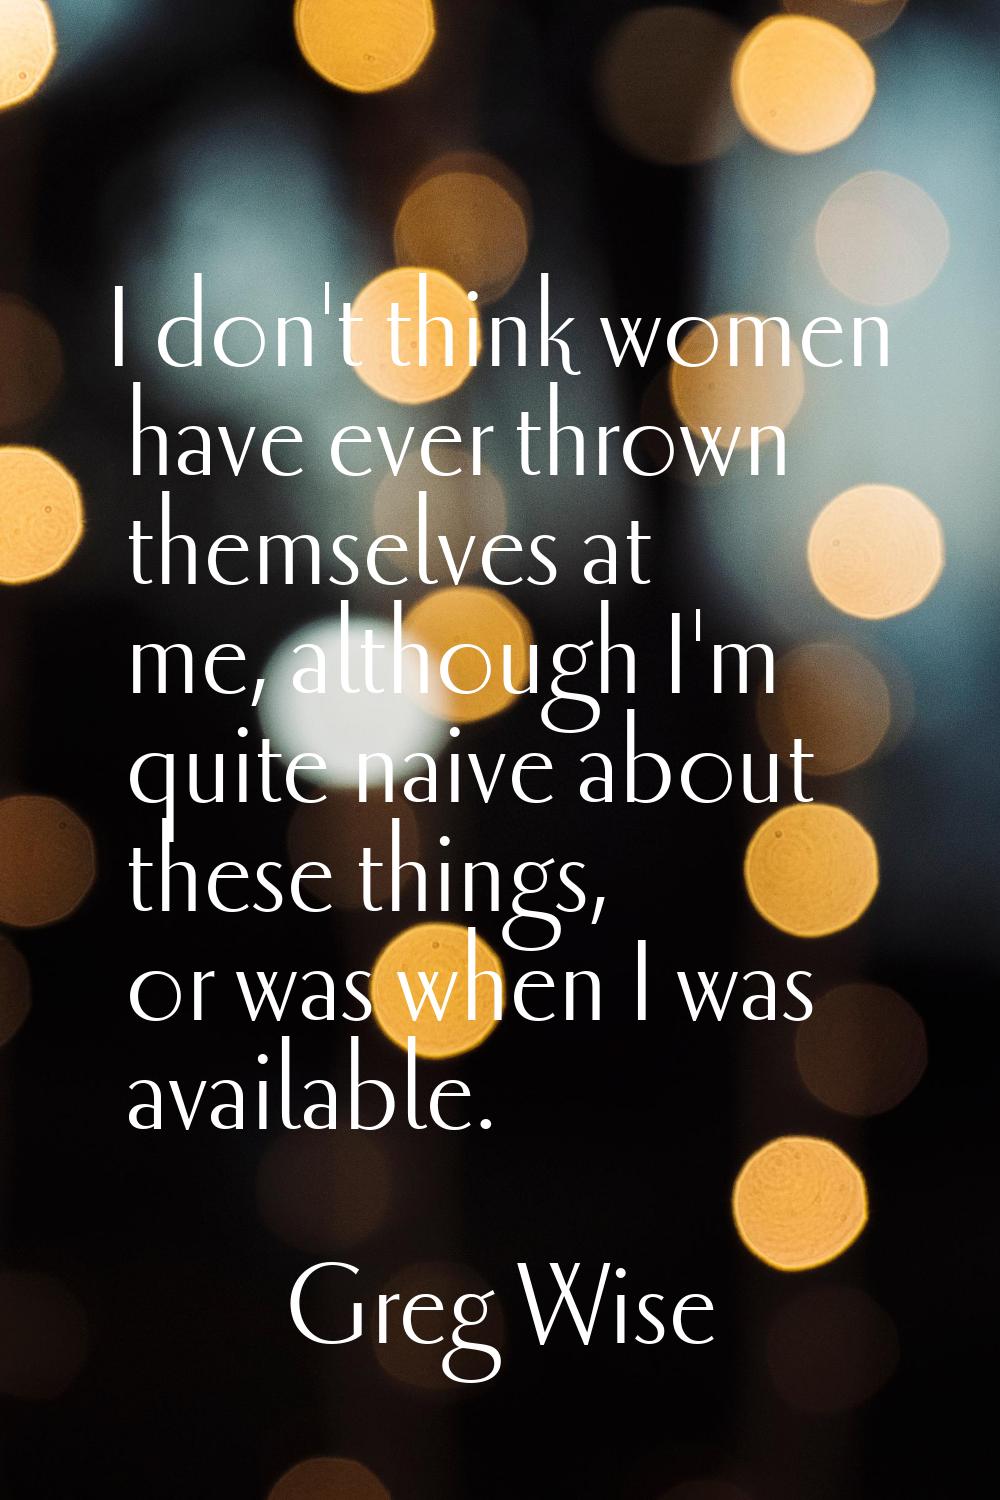 I don't think women have ever thrown themselves at me, although I'm quite naive about these things,